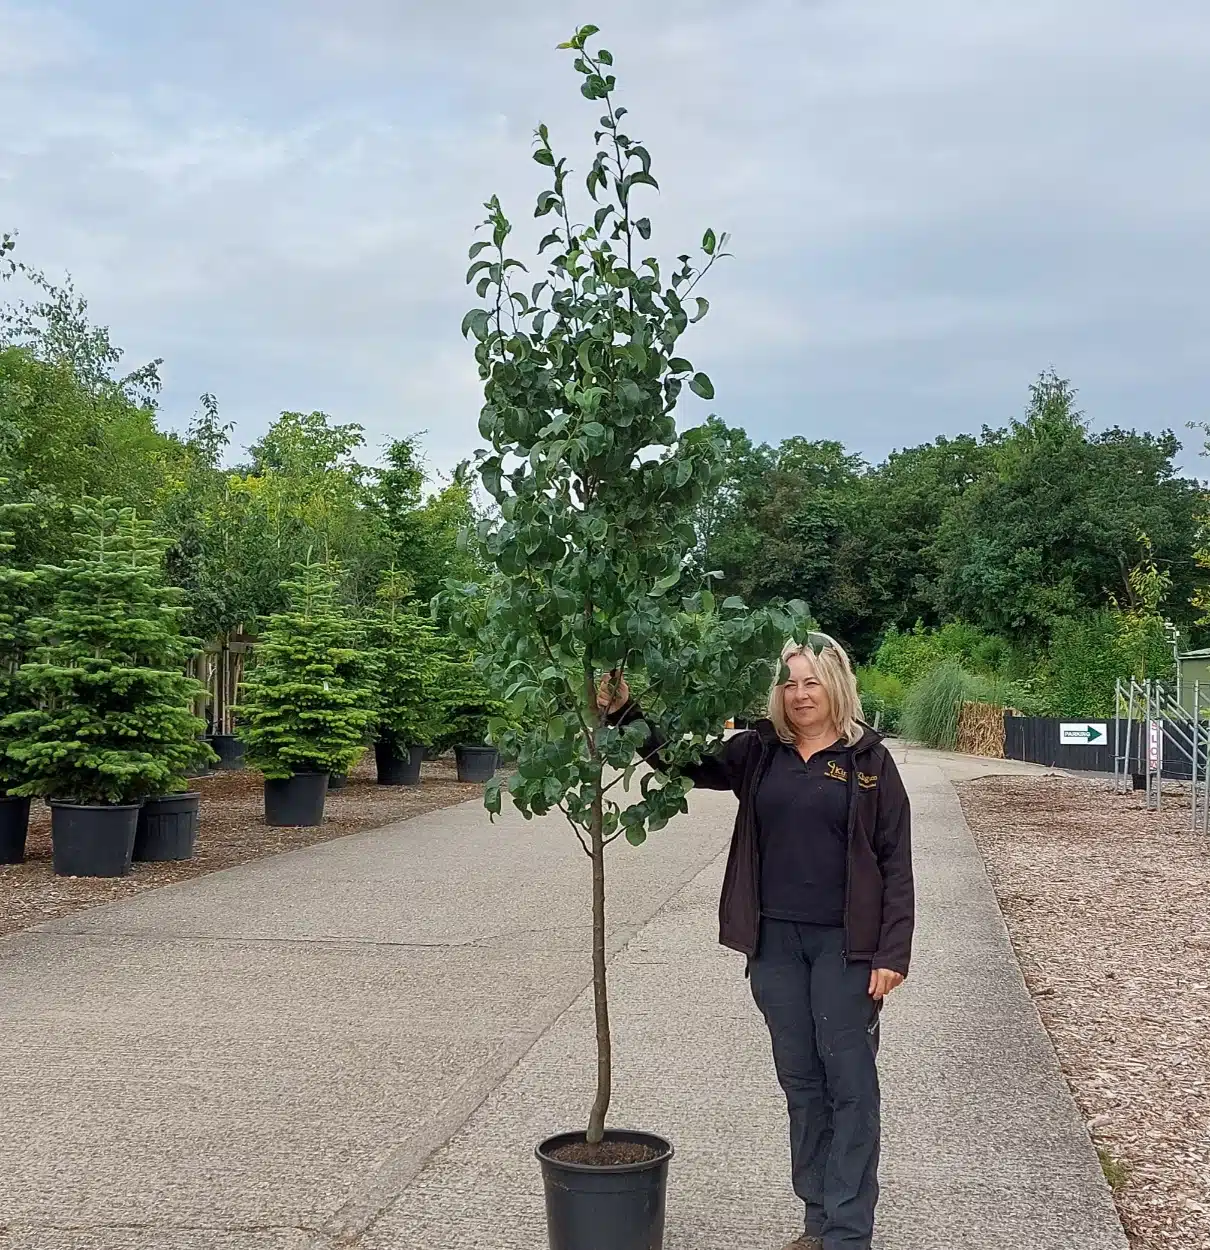 Pyrus communis Beurre Hardy – Beurre Hardy pear 6-8cm girth potted